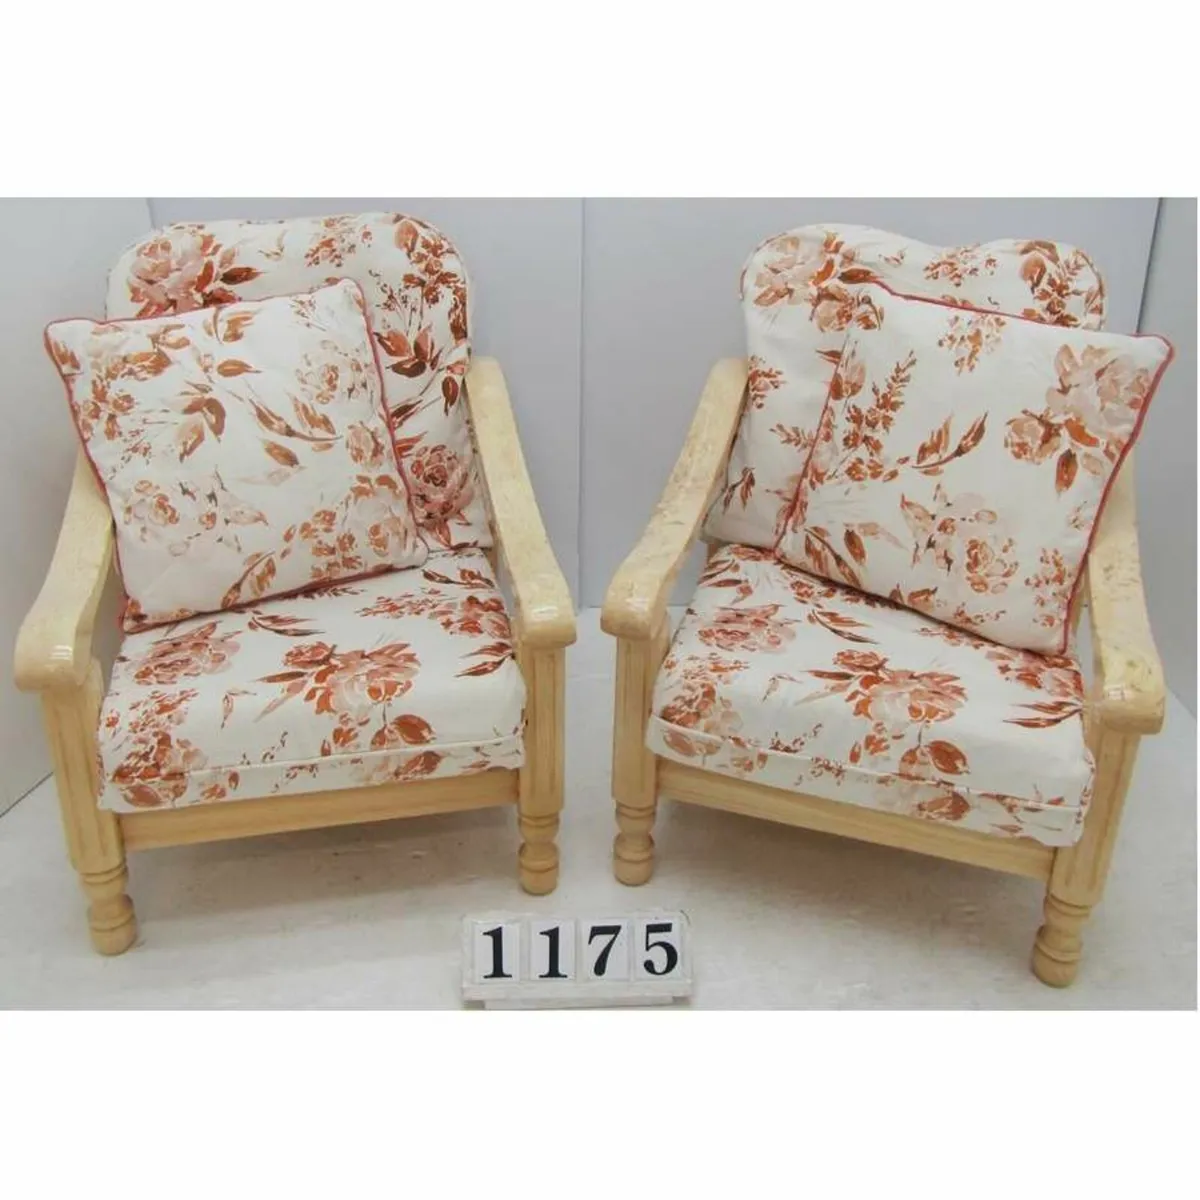 Pair of wooden frame armchairs.   #1175